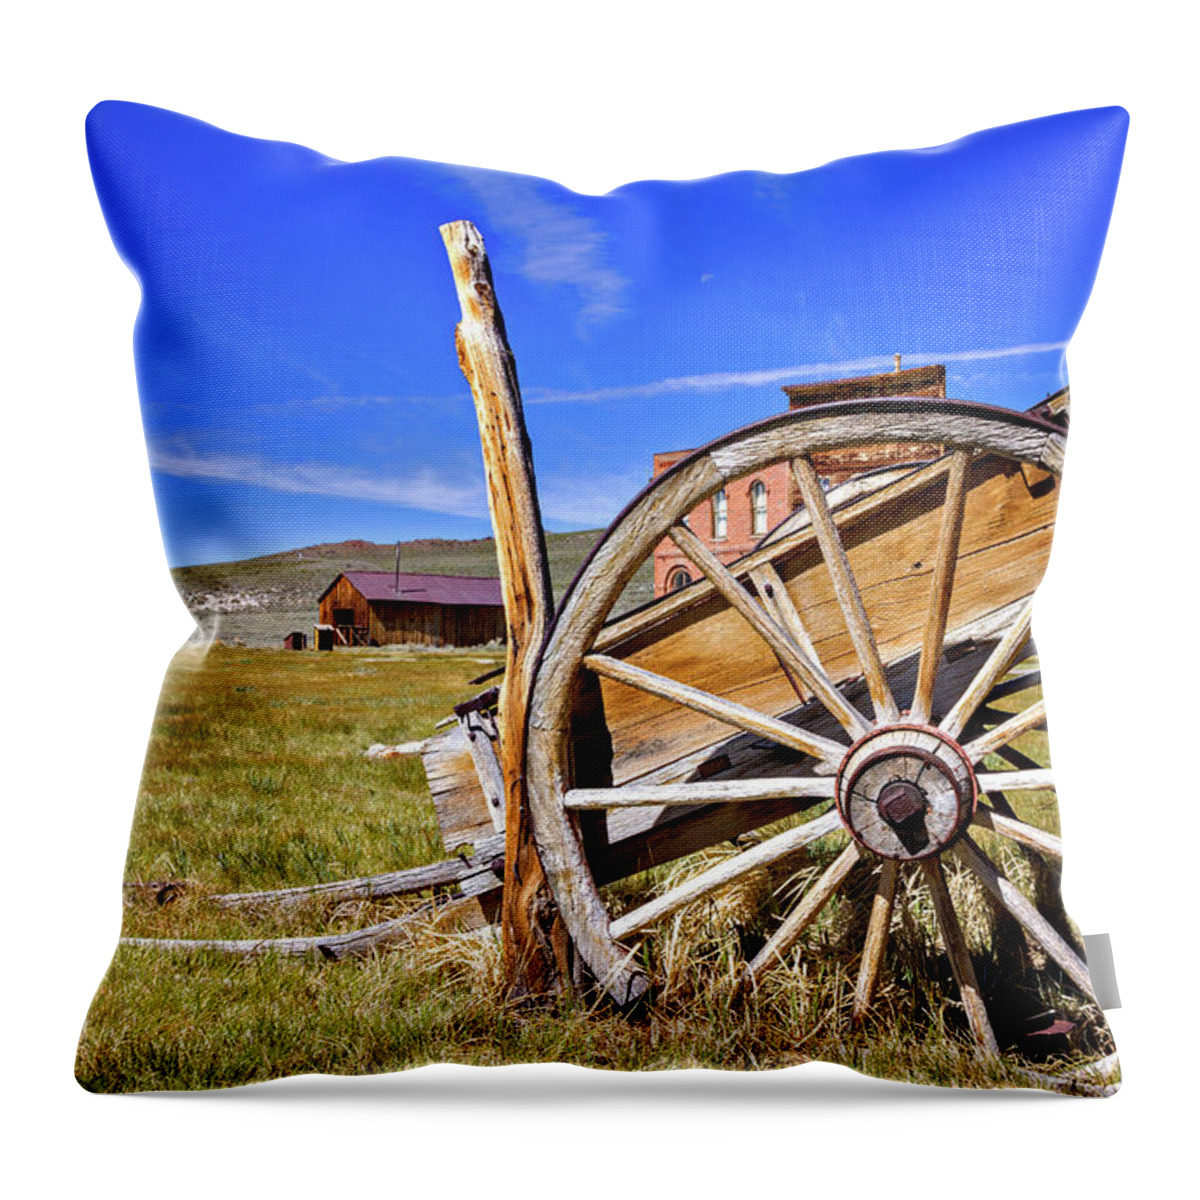 Bodie Throw Pillow featuring the photograph Rustic Wagon by Lana Trussell